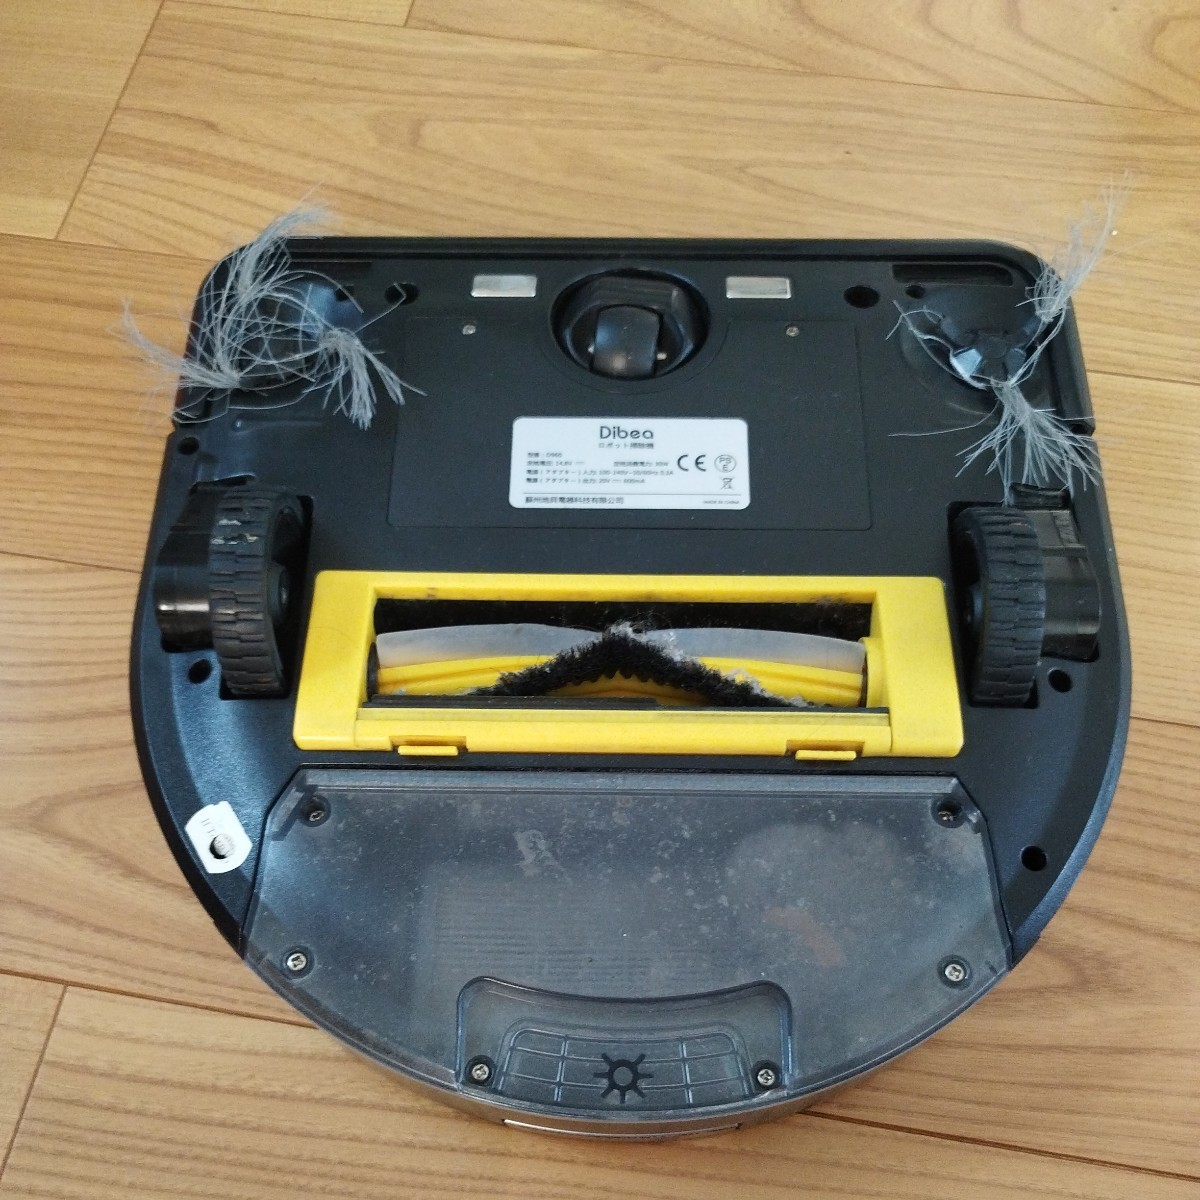  robot vacuum cleaner Dibea D960. cleaning robot falling prevention automatic junk neatly doesn`t work vacuum cleaner only. 